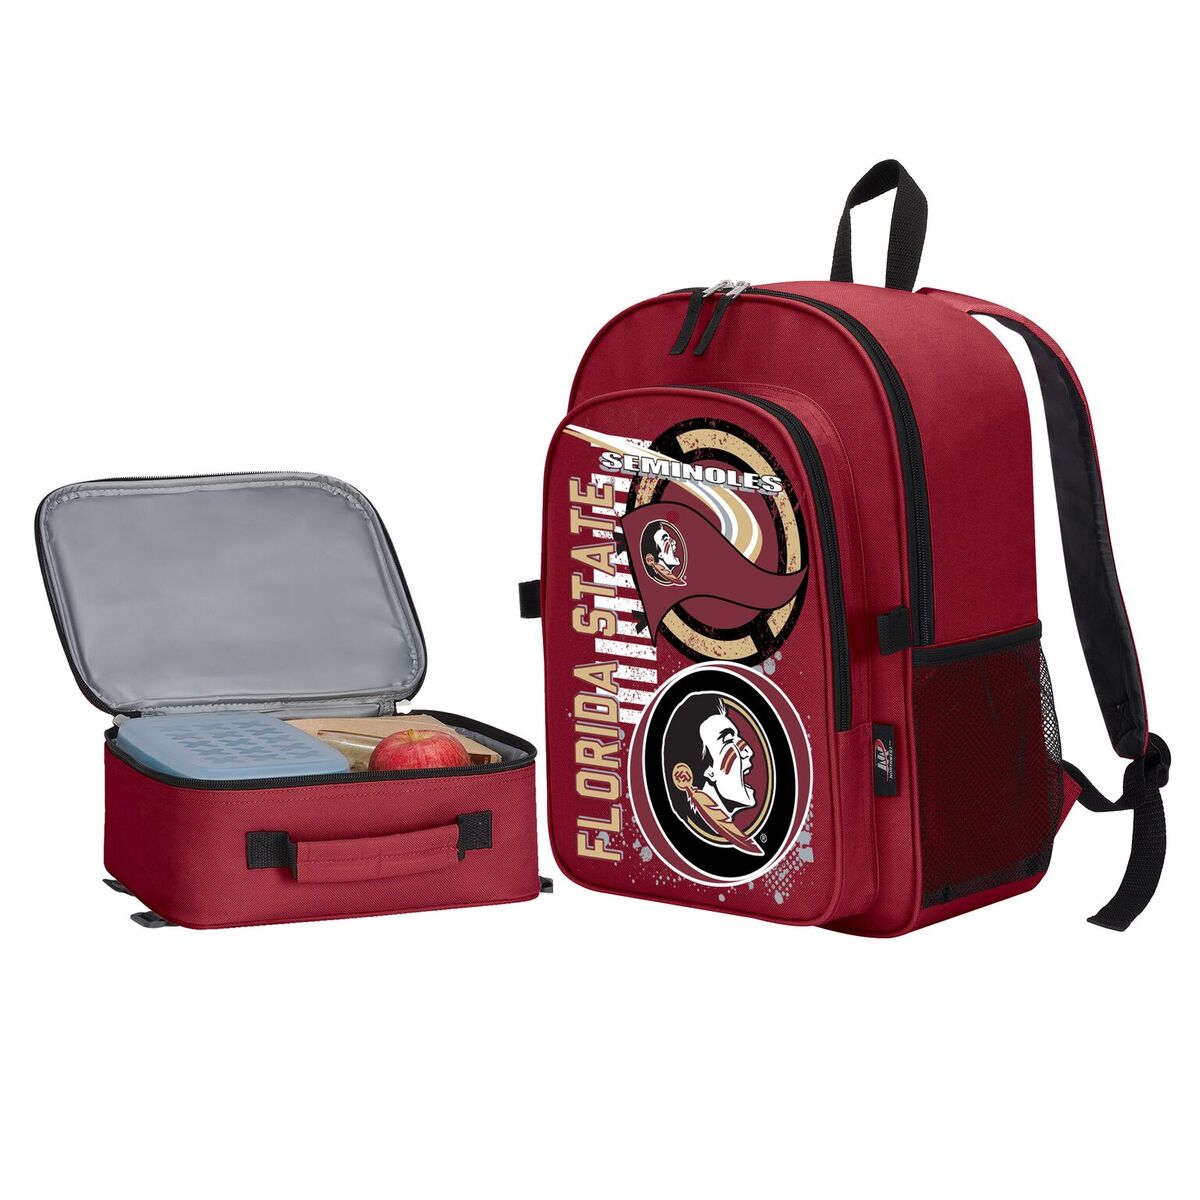 Florida State Seminoles "Accelerator" Backpack and Lunch Kit Set - image 3 of 9